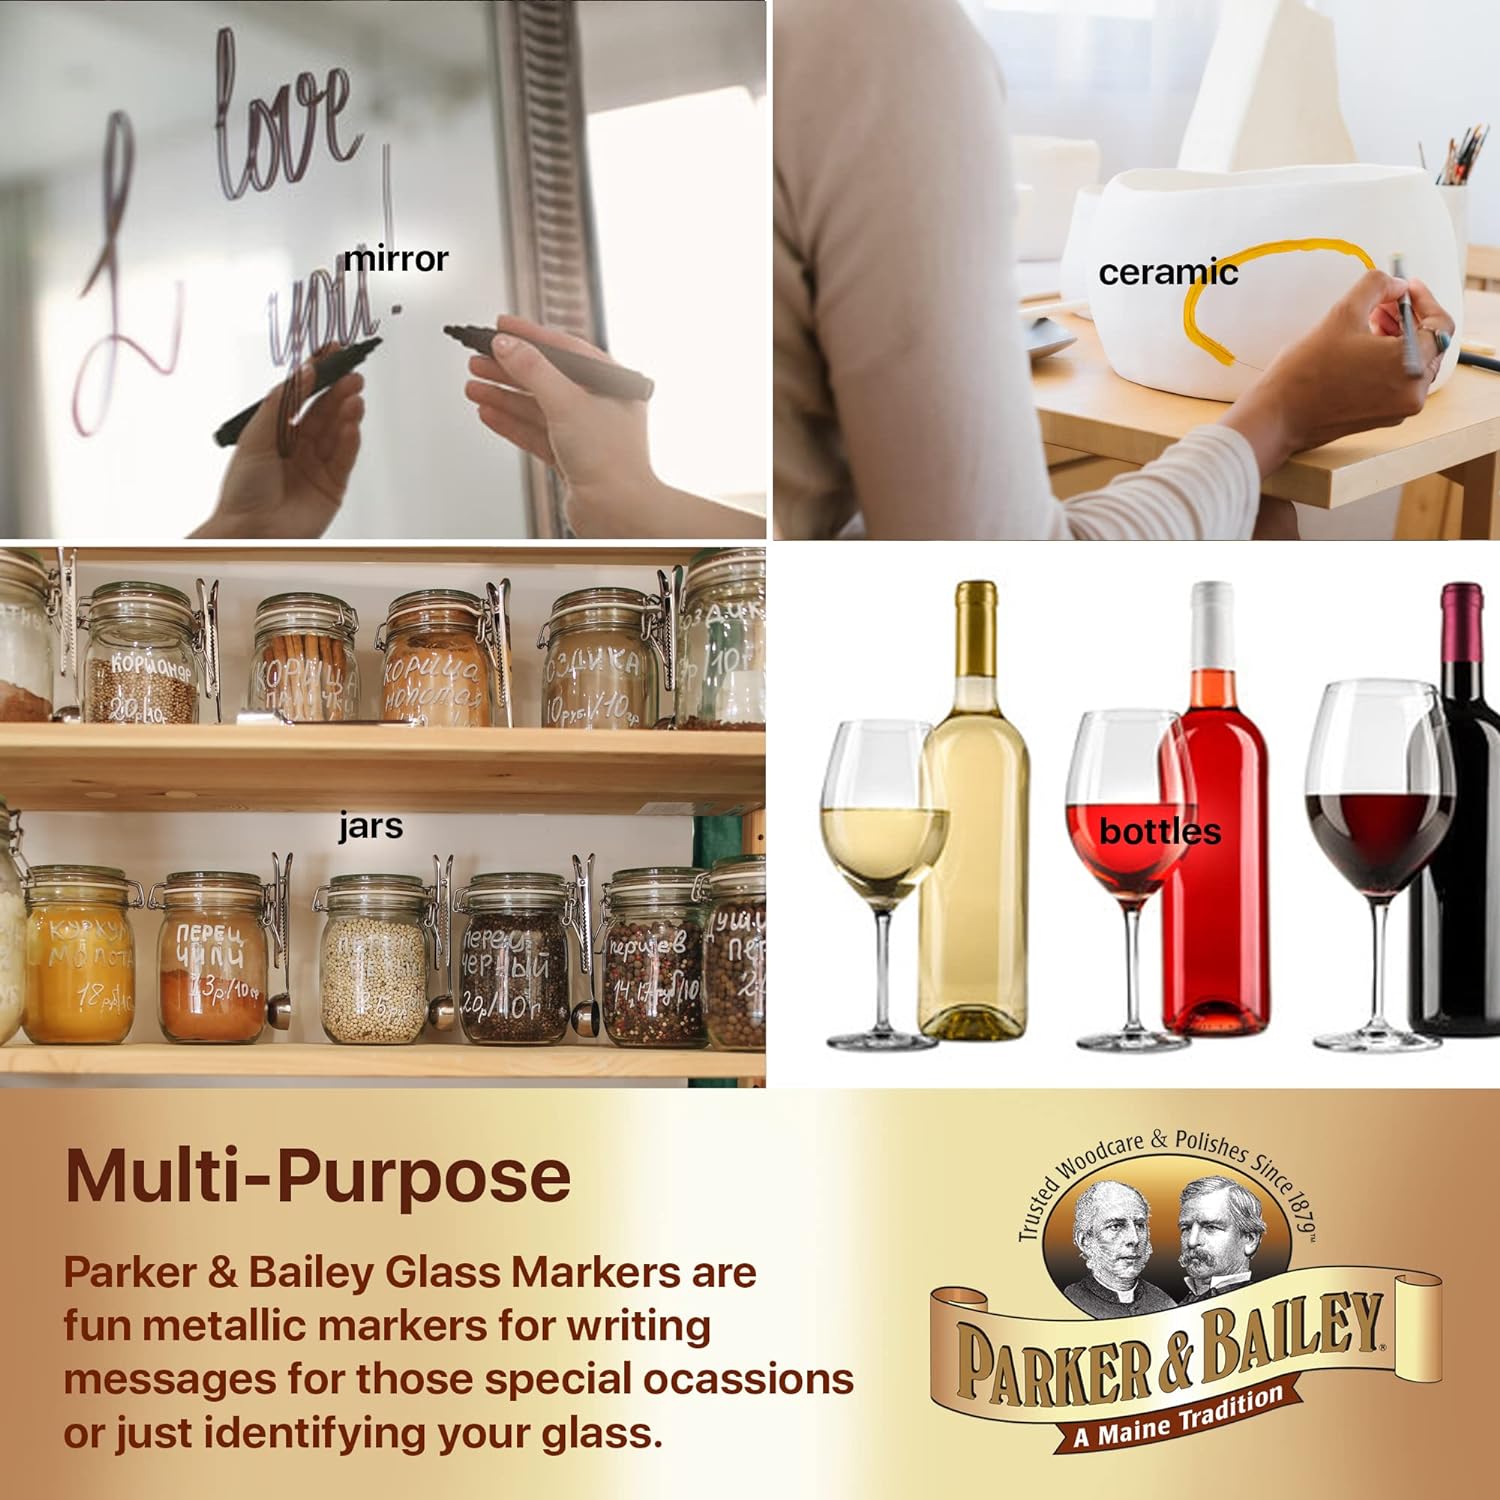 Parker & Bailey Washable Glass Markers - Metallic Washable Wine Markers for Window Mirror Ceramics Drink Glasses Bottles